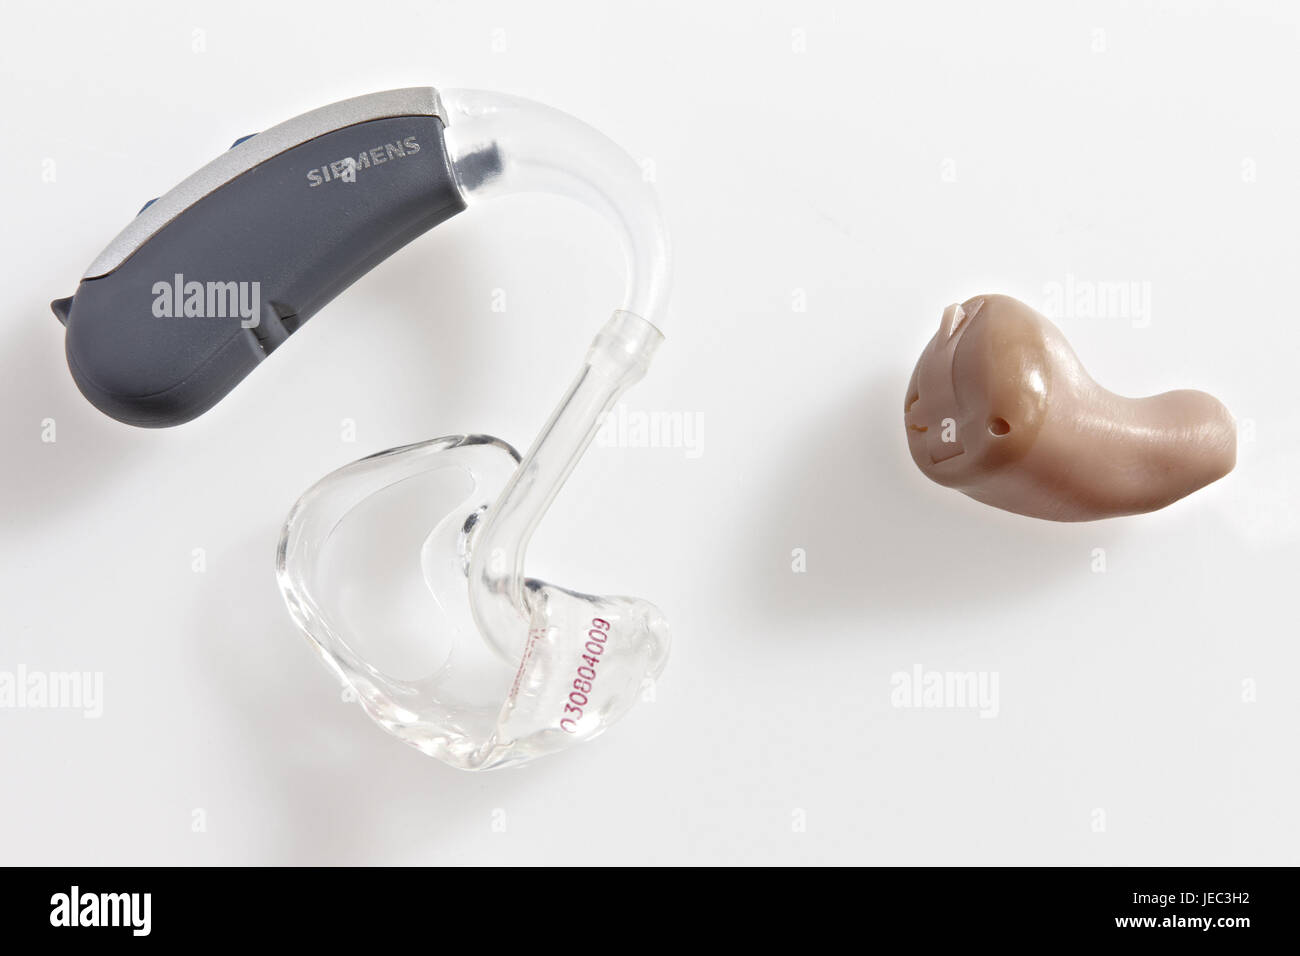 Hearing aids, differently, in ear device, Hinter-dem-Ohr-Gerät, two, analogously, accessory, everyday coping, hearing impairment, support, help, hear, hearing-injured, hearing, severe bondage, hard of hearing, medical device, object photography, studio, Otoplastik, hearing help, impediment, hearing aid Stock Photo